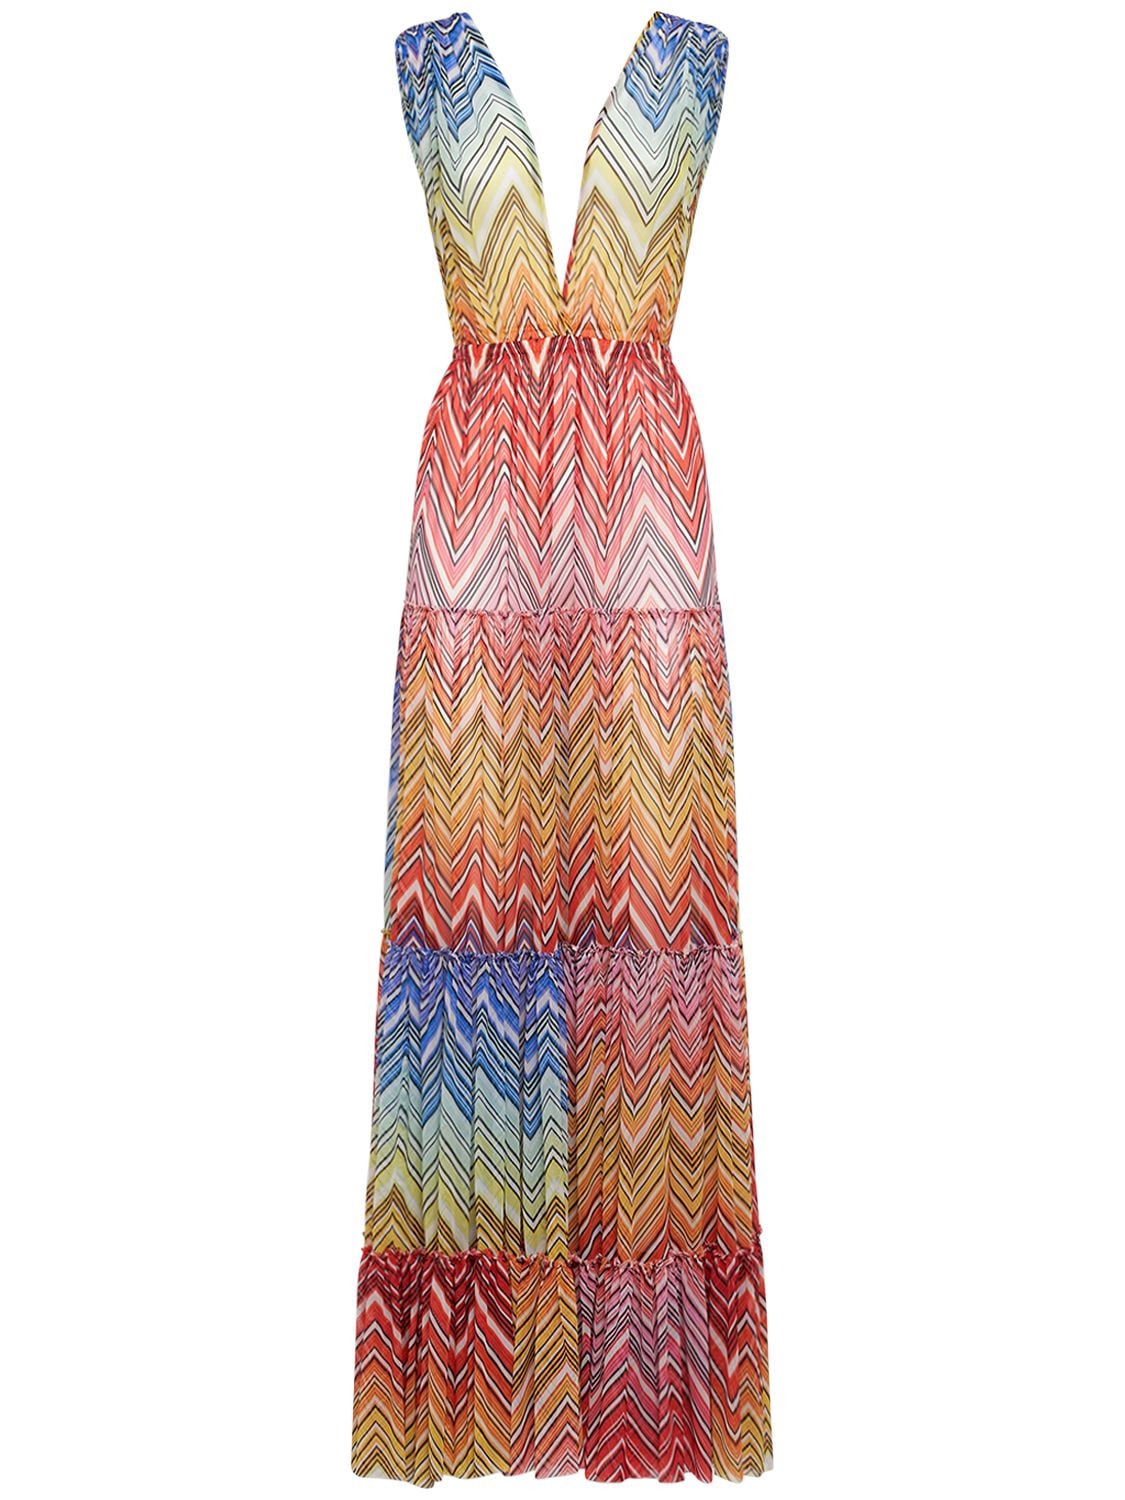 Image of Chevron Print Tulle Long Tiered Dress